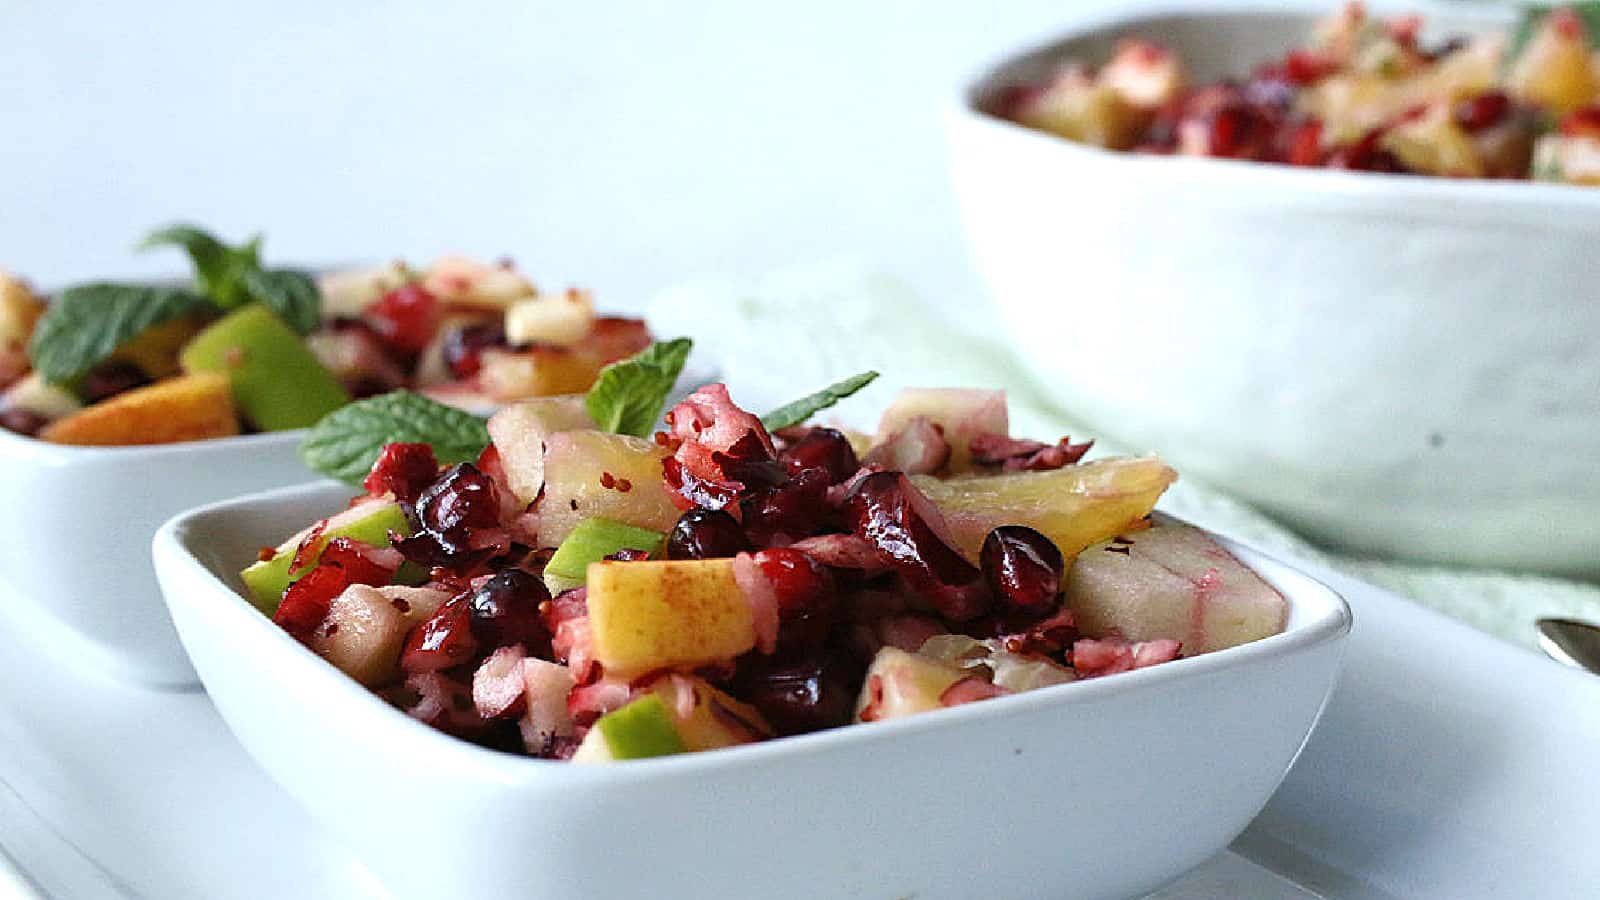 Cranberry fruit salad in white bowls.